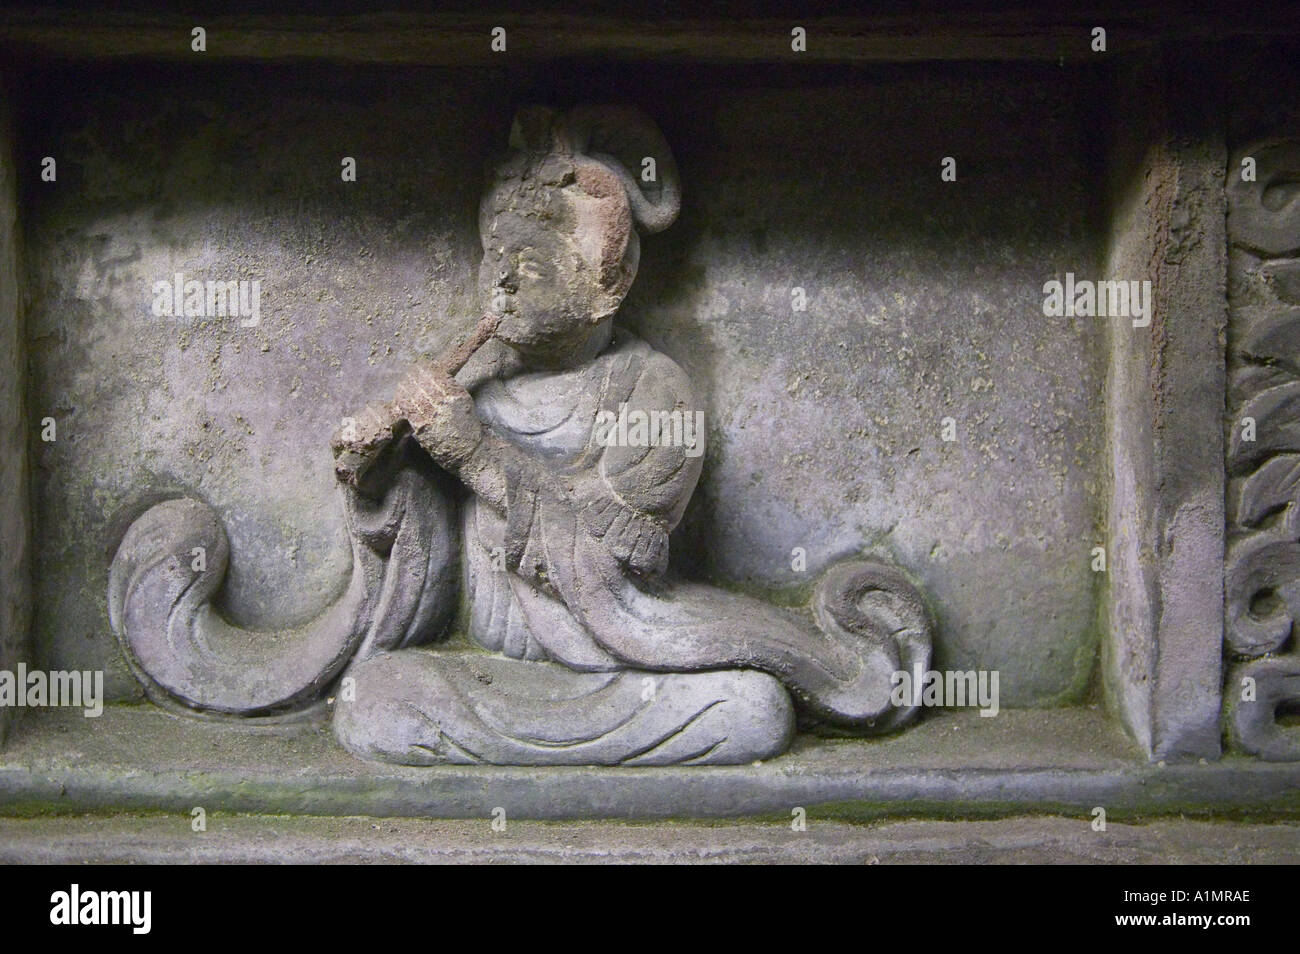 Carved figure of female musician holding traditional Chinese flute instrument Grand Bili in Yong Ling Tomb Chengdu Sichuan China Stock Photo